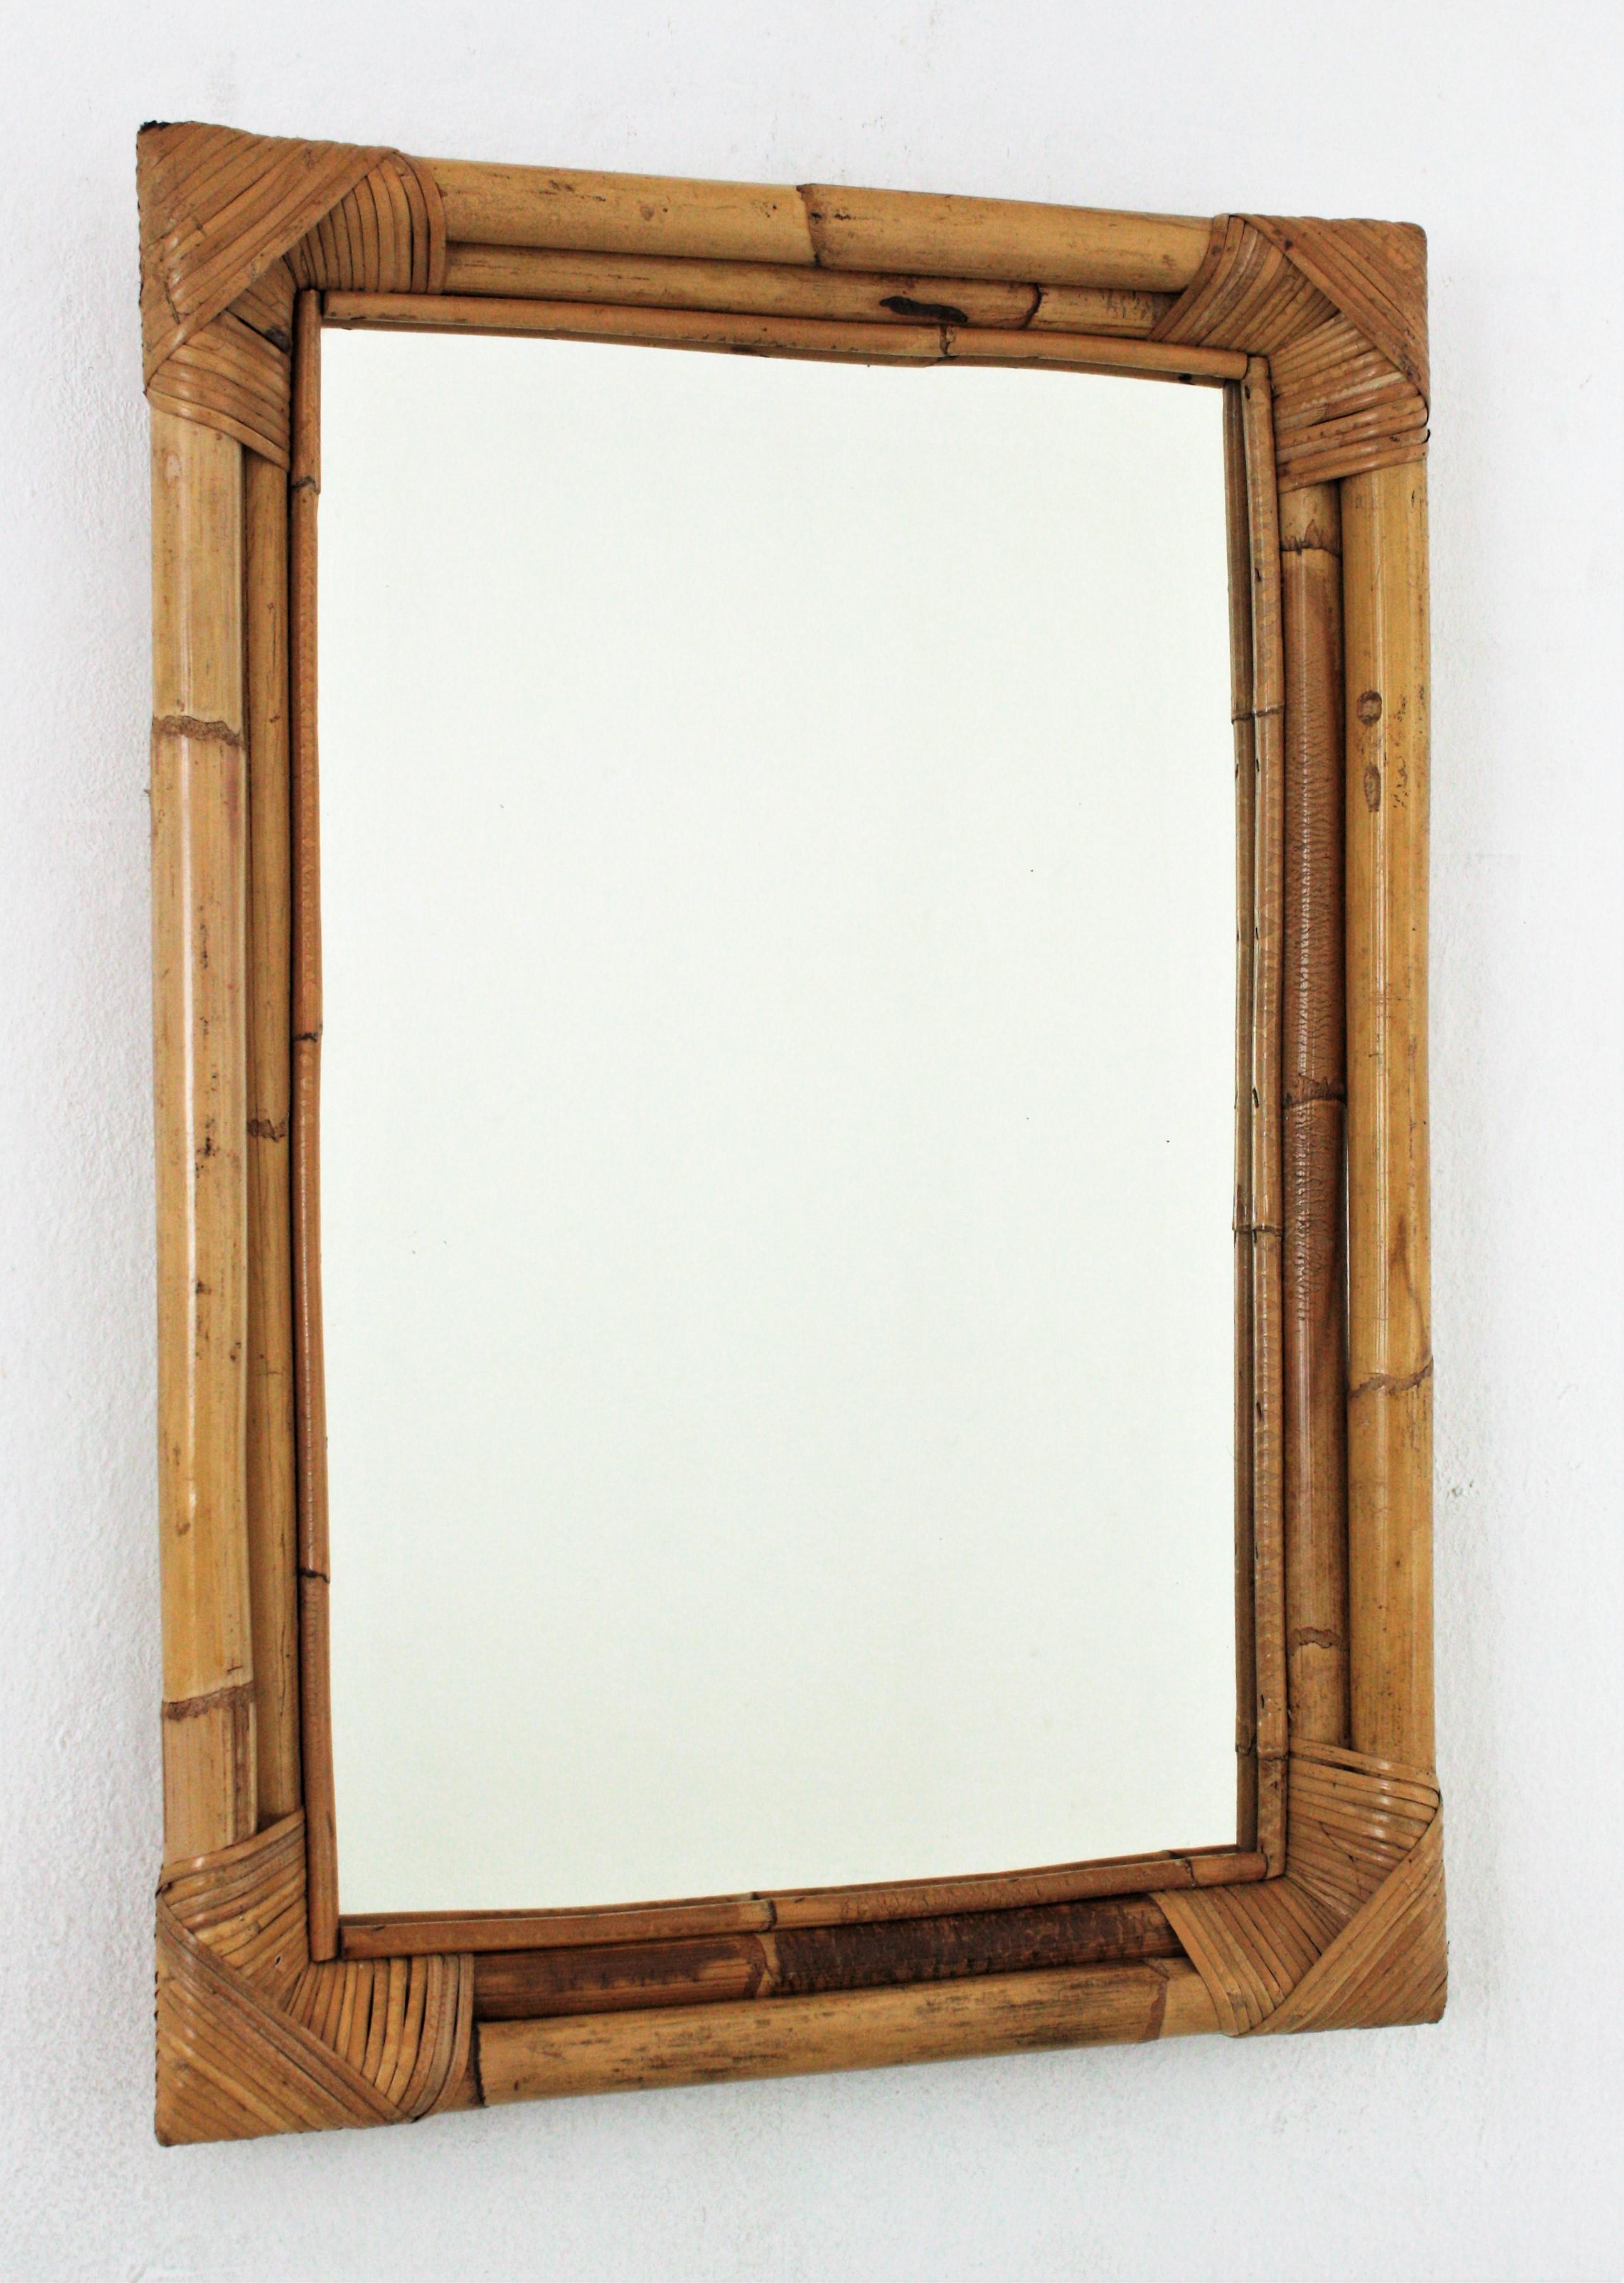 Rectangular wall mirror, bamboo, rattan
Eye-catching rectangular mirror handcrafted with bamboo cane. Spain, 1960s.
Rectangular frame made of bamboo with wicker accents on the corners. It can be hung in vertical or horizontal position.
This